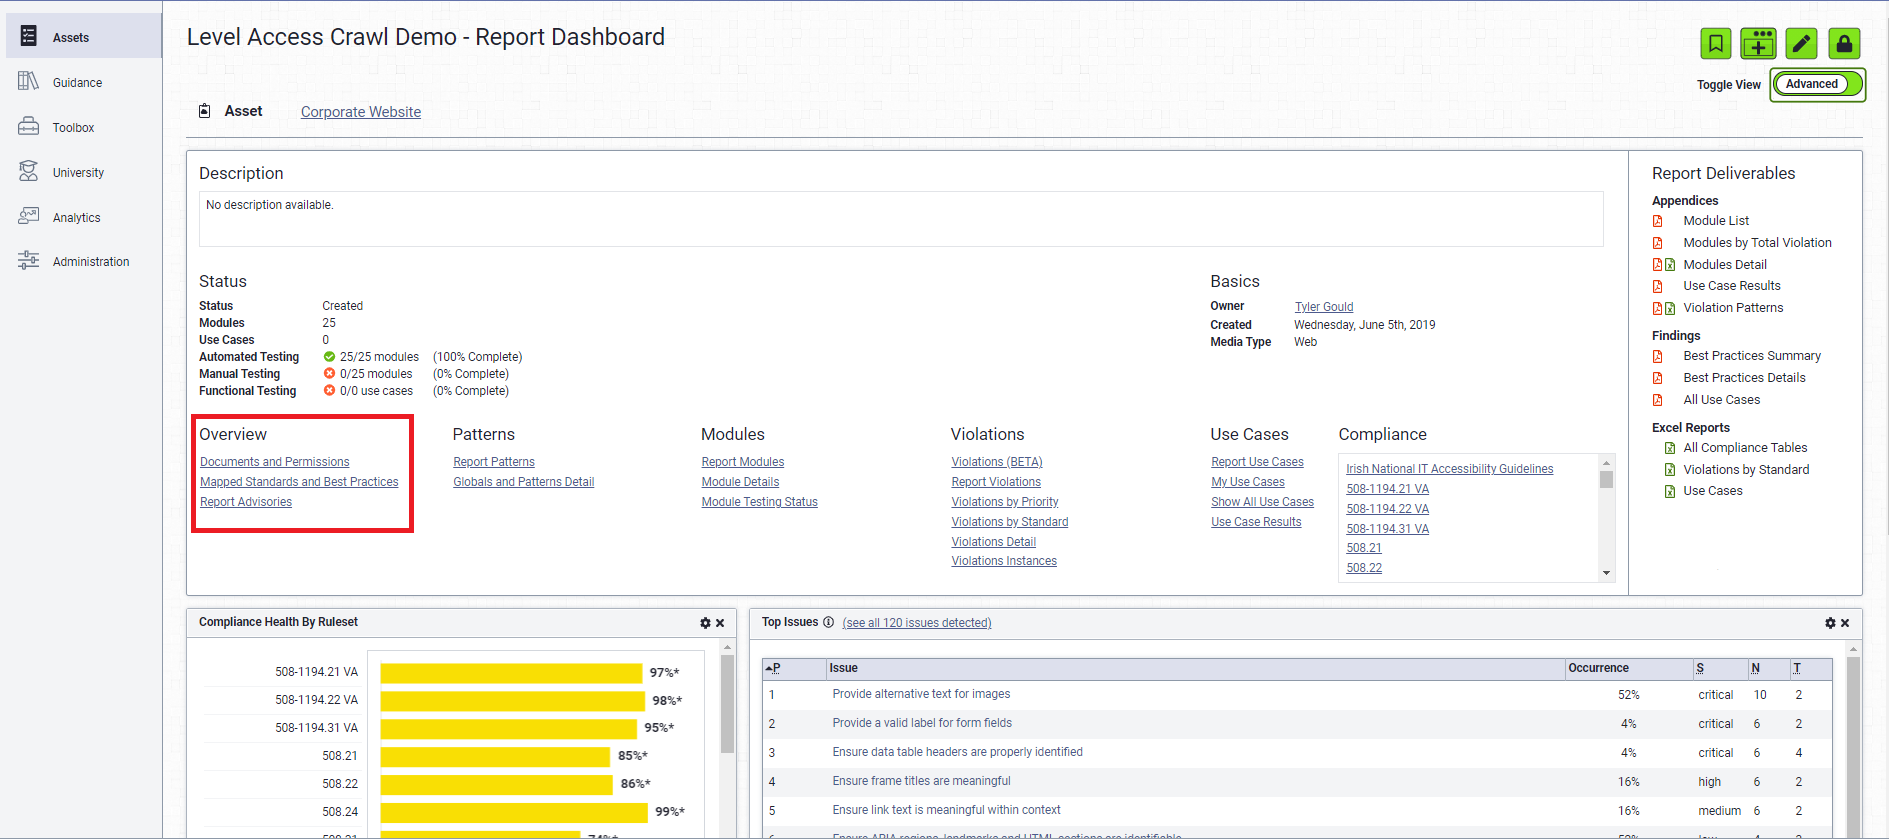 Report dashboard, shows the Overview section.